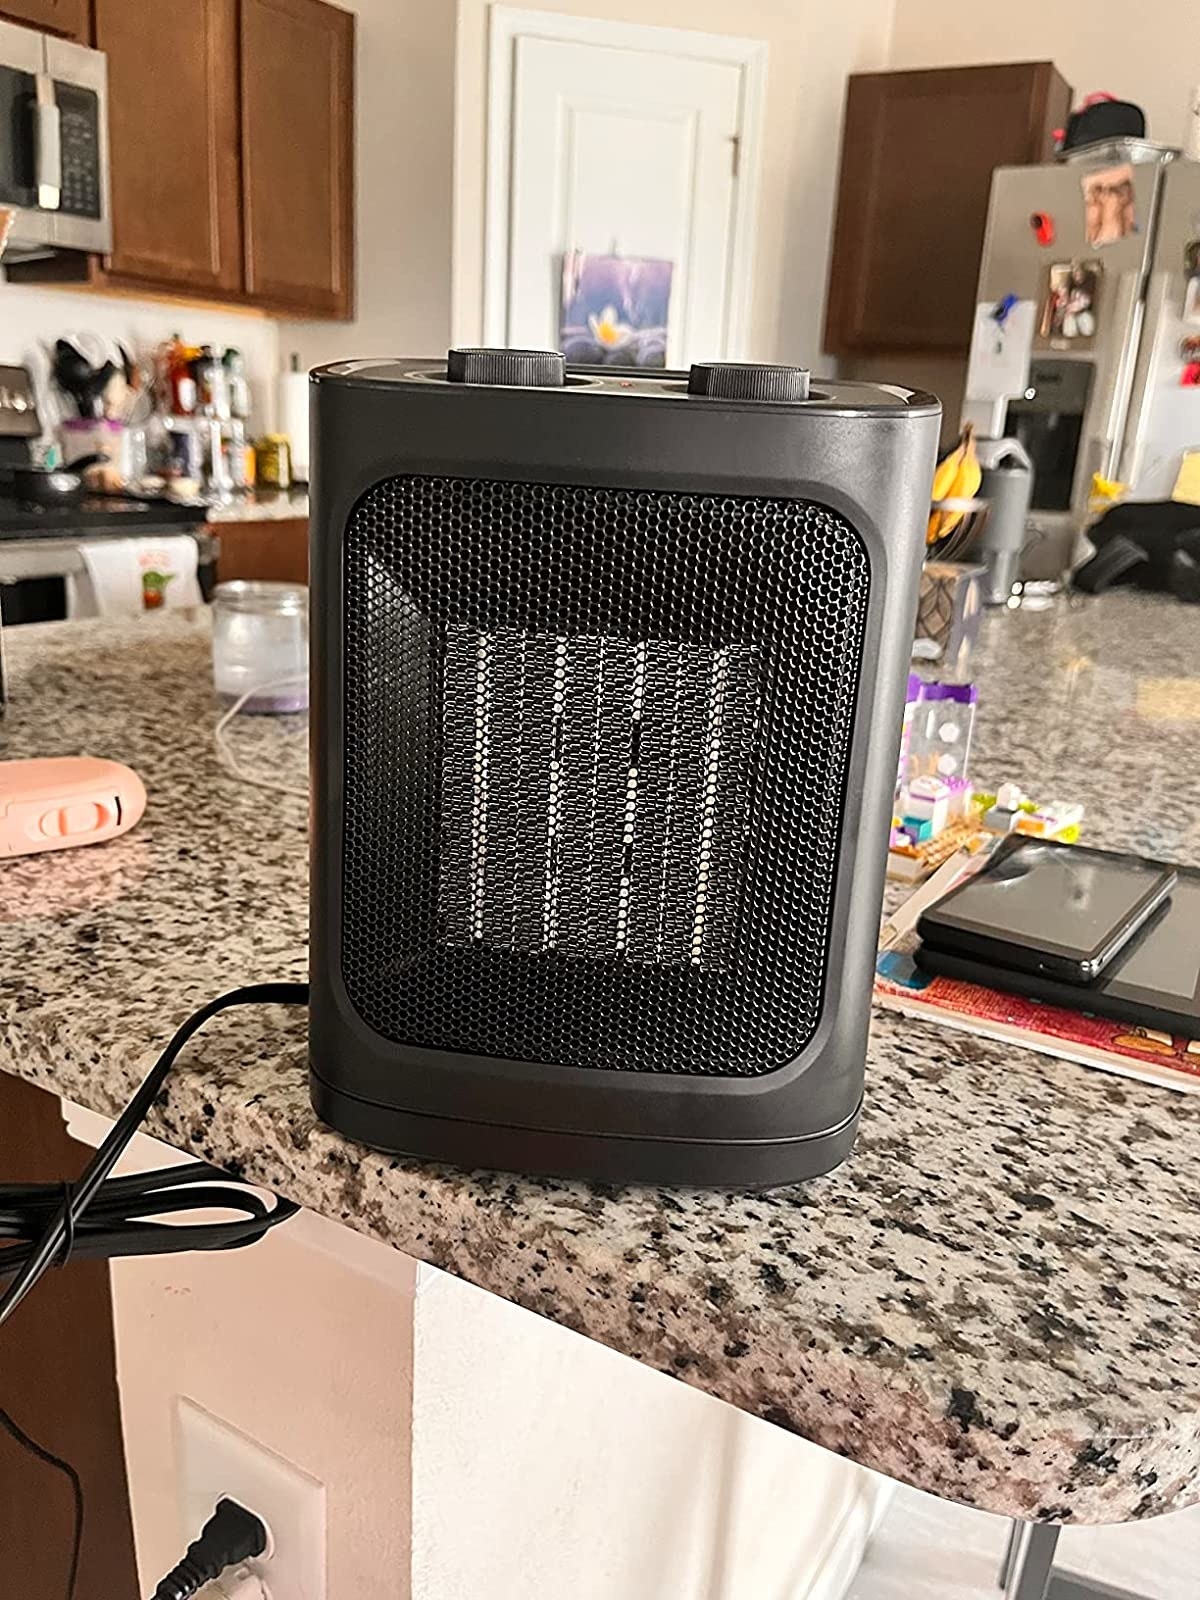 Reviewer image of portable space heater sitting on their countertop